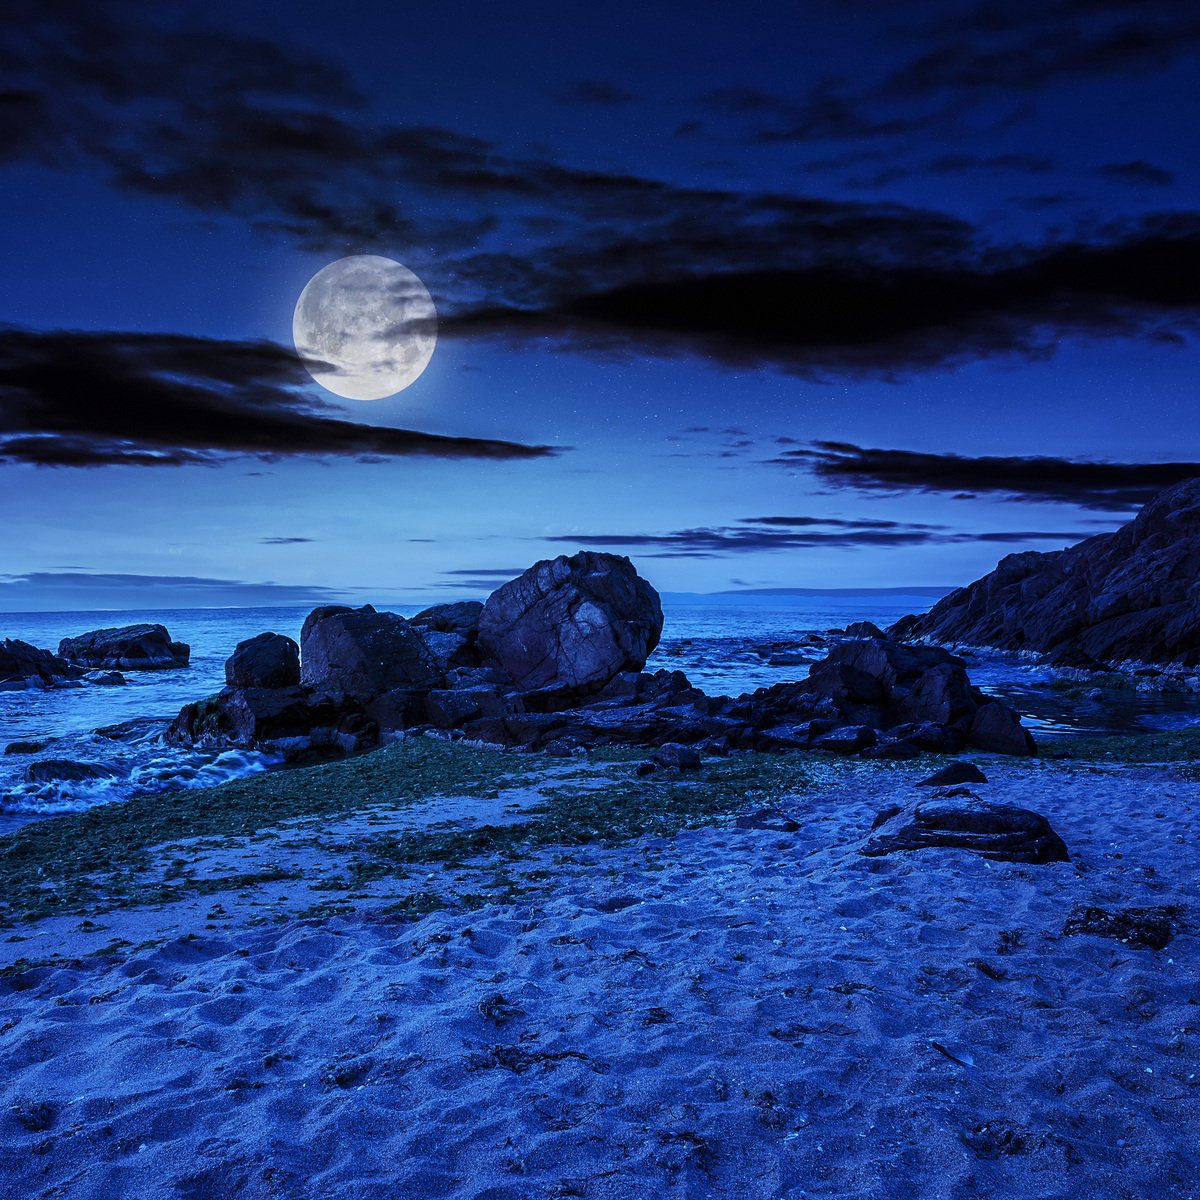 a full moon over the ocean at night with rocks and grass